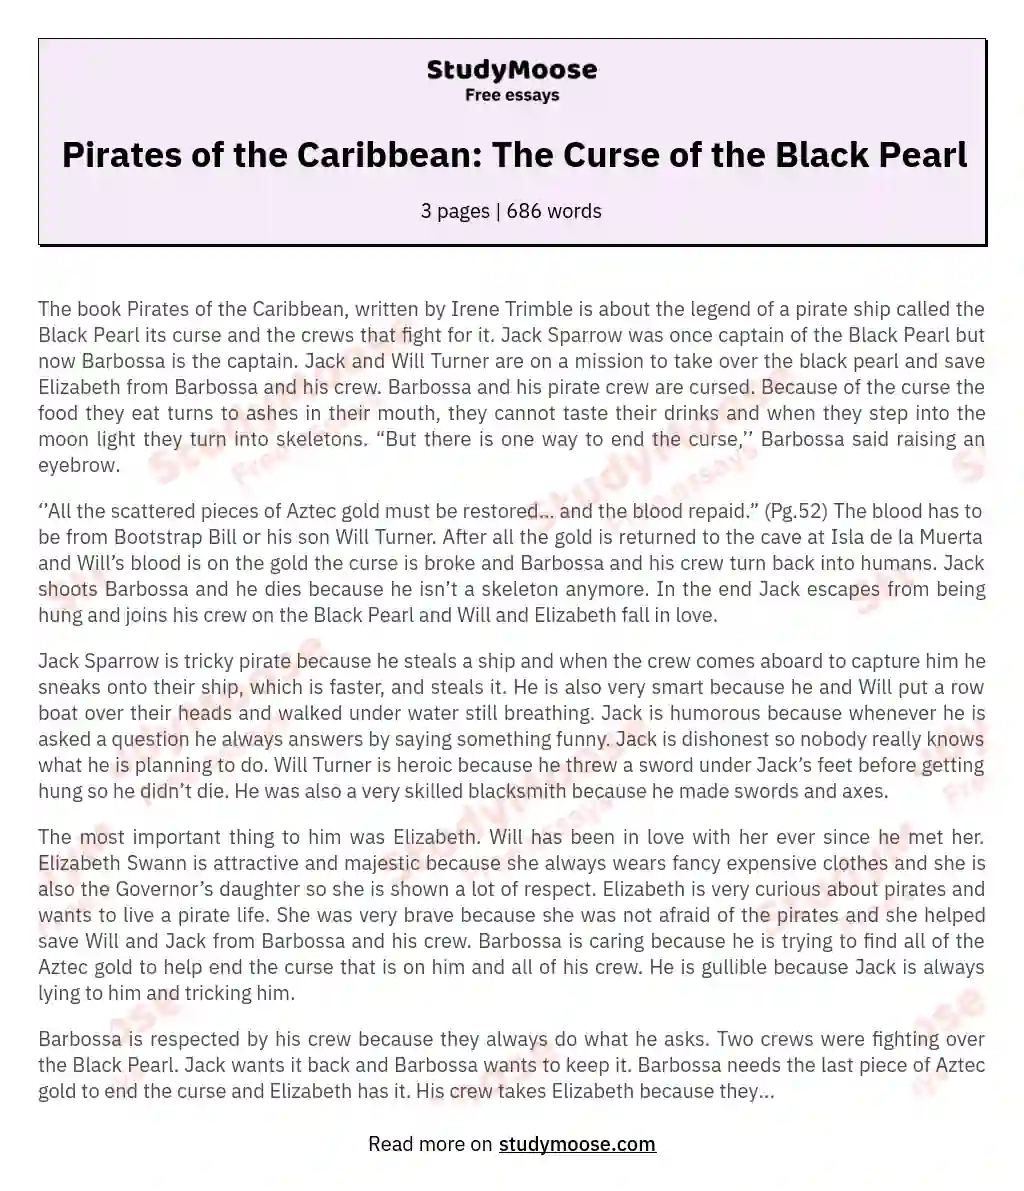 Pirates of the Caribbean: The Curse of the Black Pearl essay